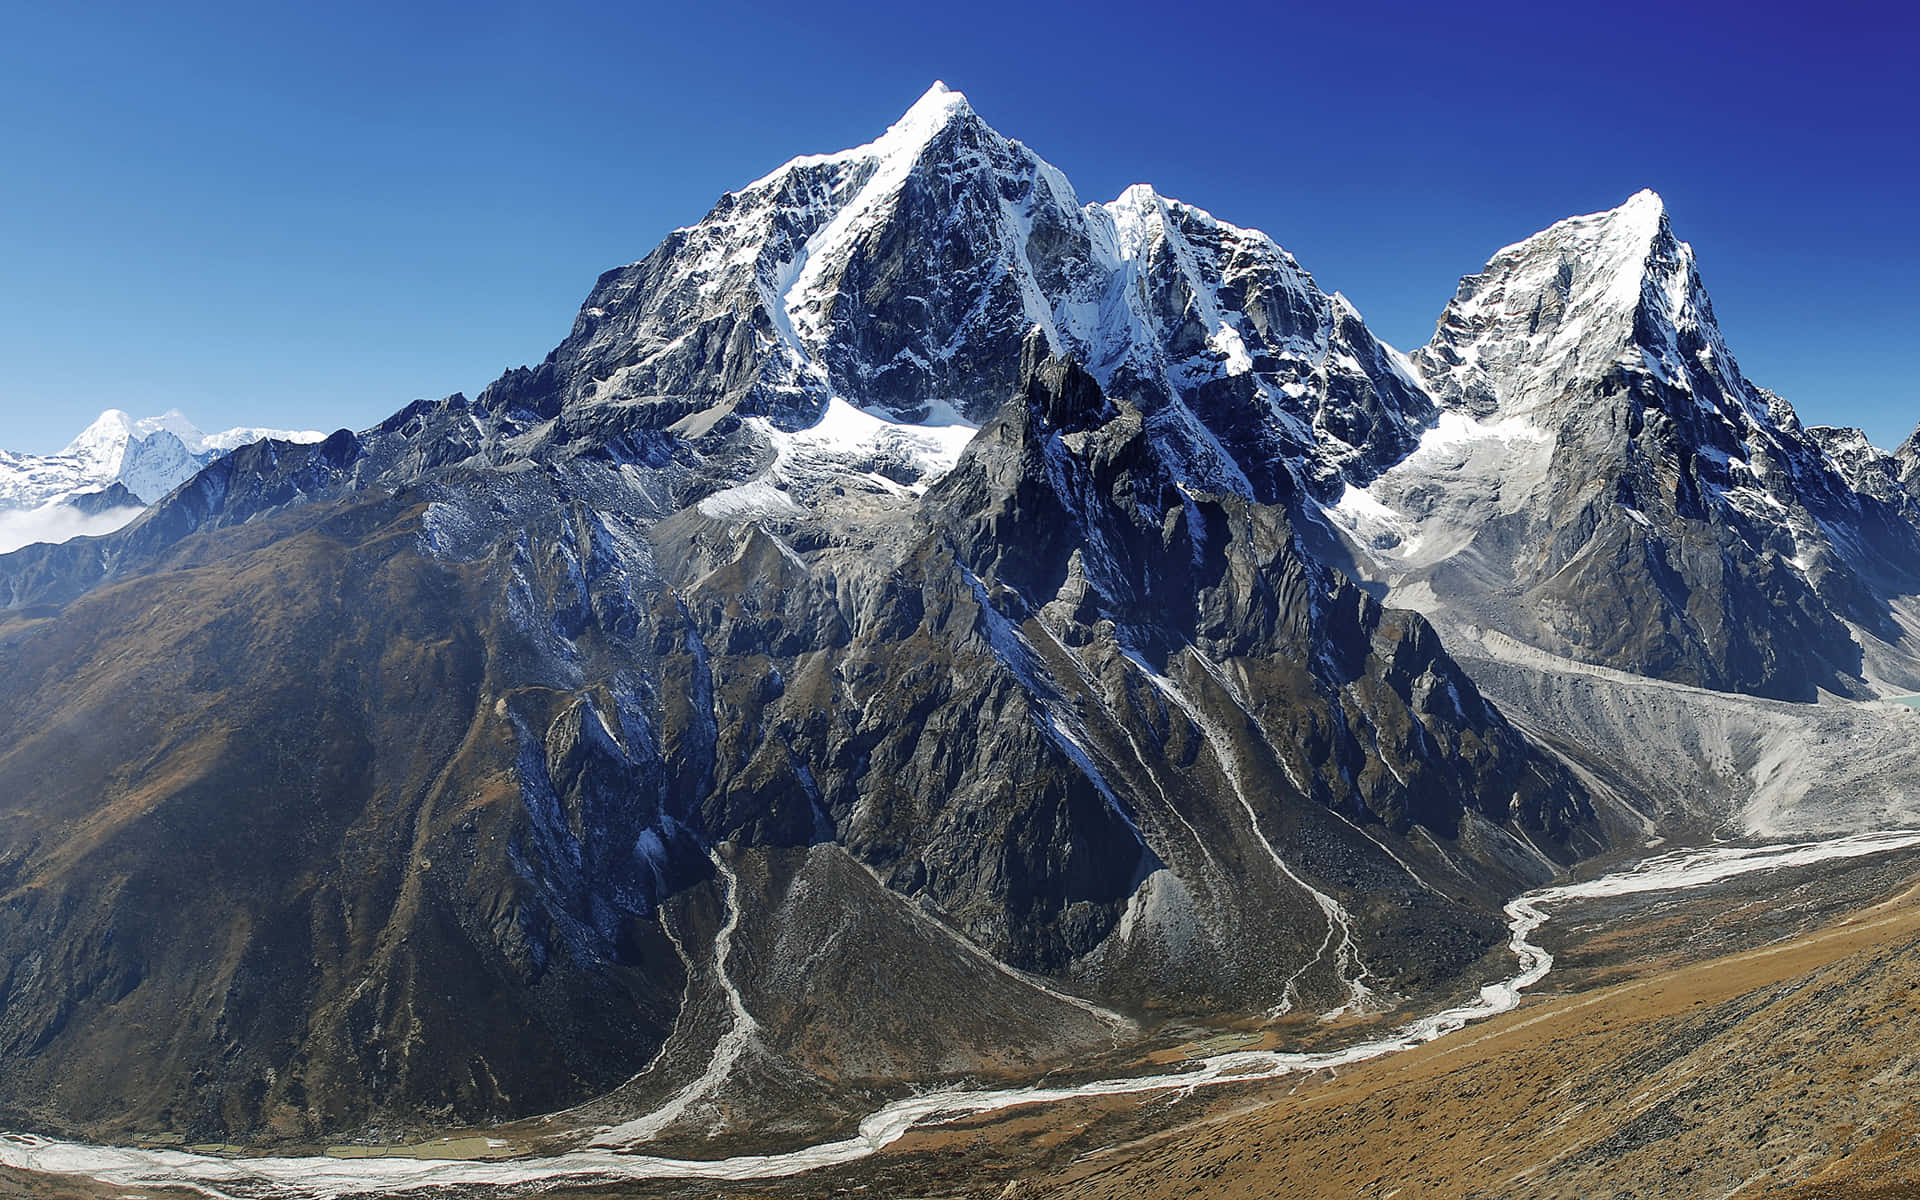 The majestic Mount Everest, the highest mountain in the world, stands tall atop the beautiful Himalayas.